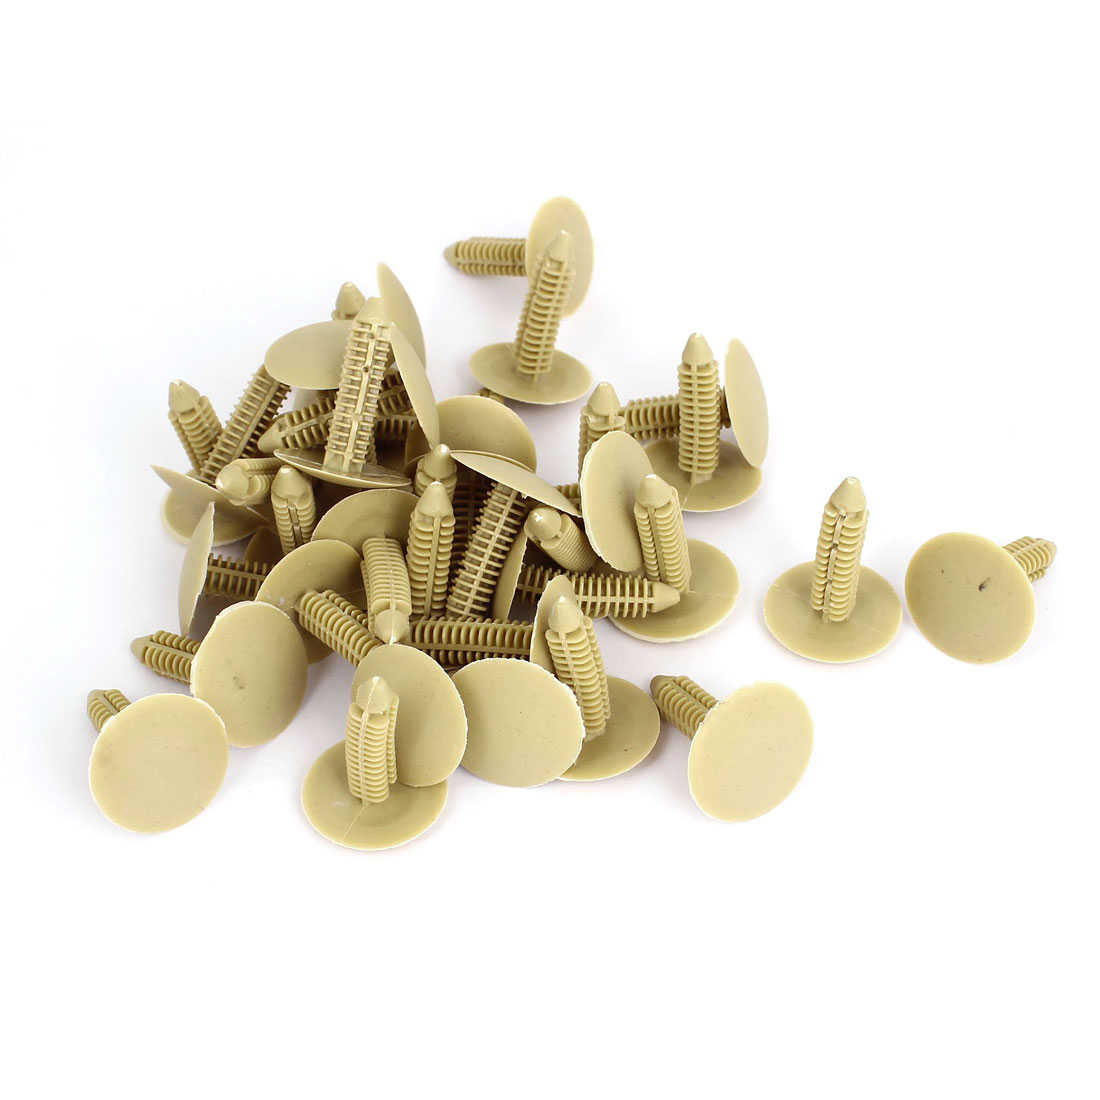 47 Pcs 7mm Hole Push in Type Plastic Rivets Fender Clips Beige for Car Auto